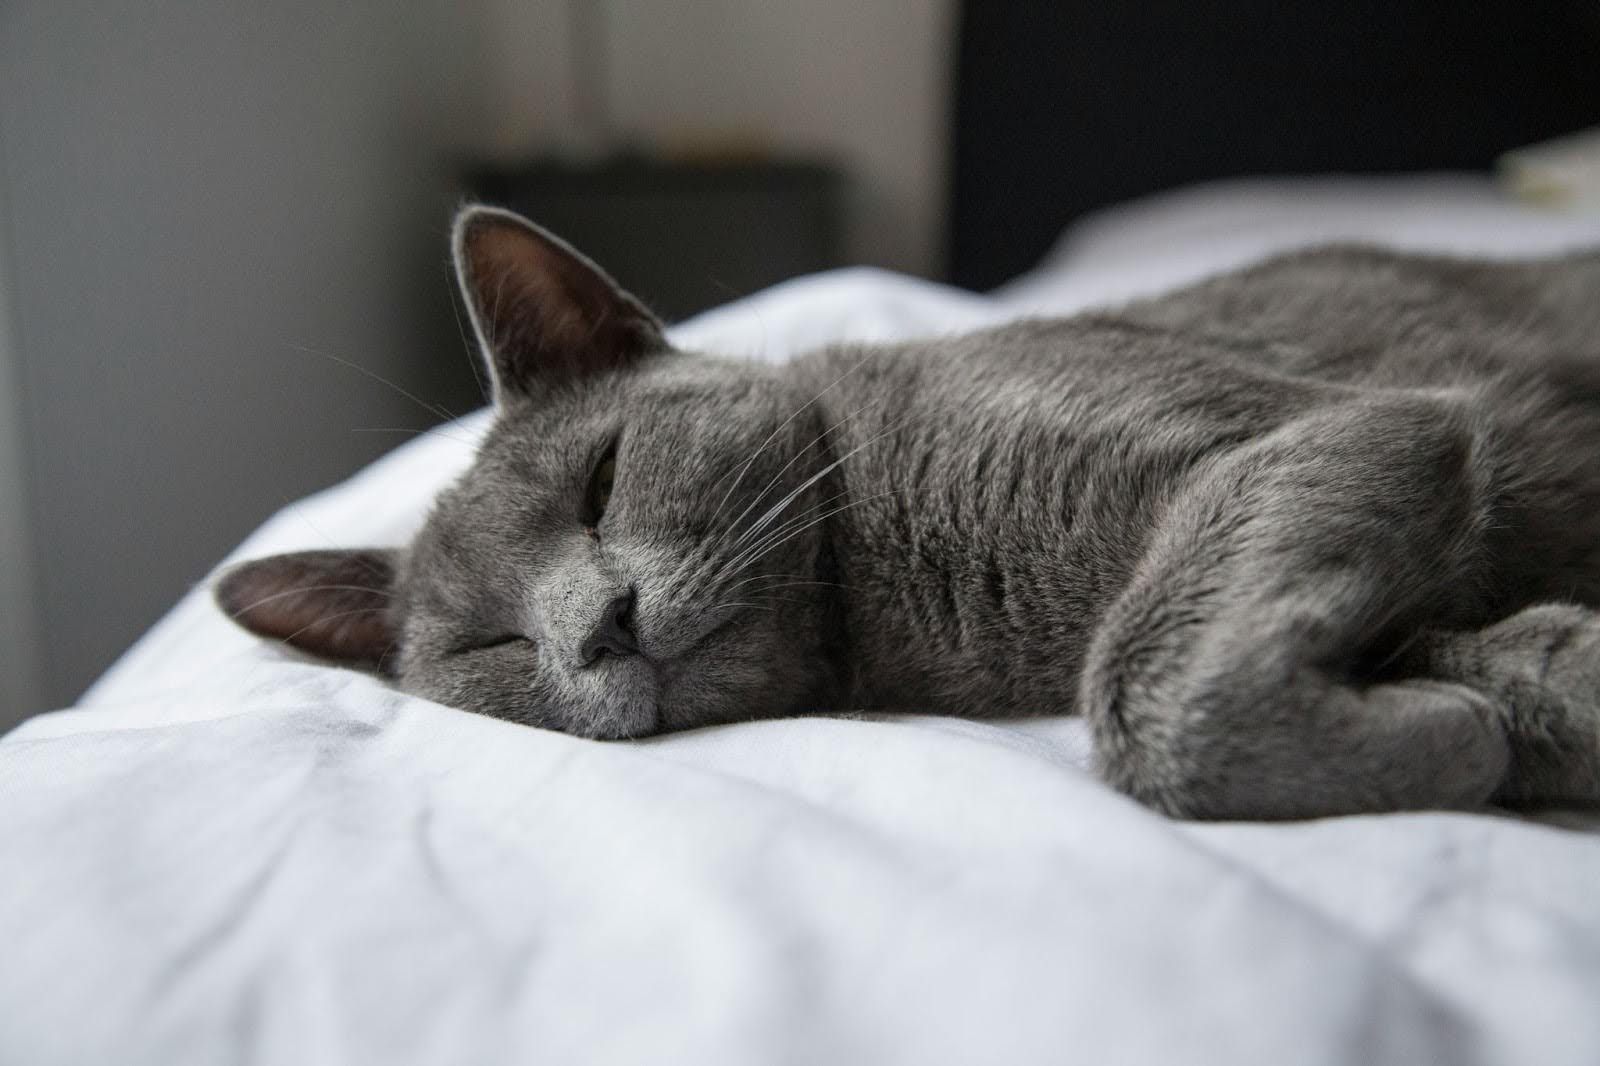 A cat with a beautiful silver grey coat lays on a white-covered bed.